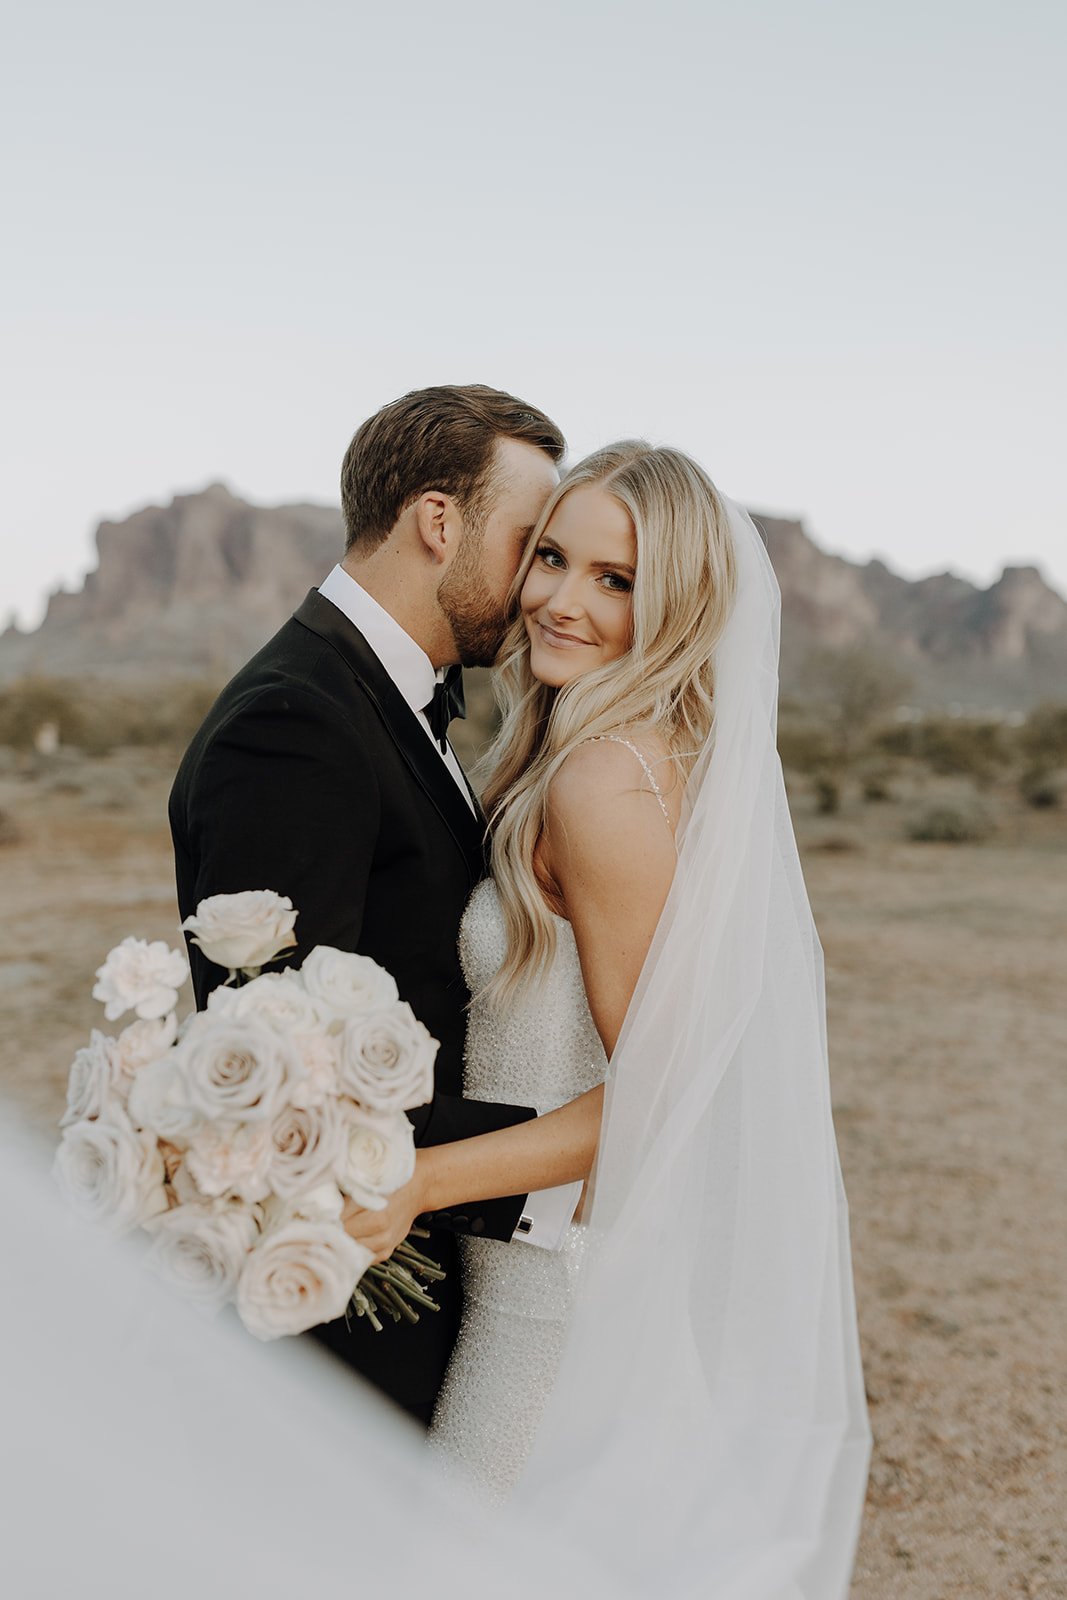 Groom kissing bride in the desert while she smiles at the camera and holds a white bouquet